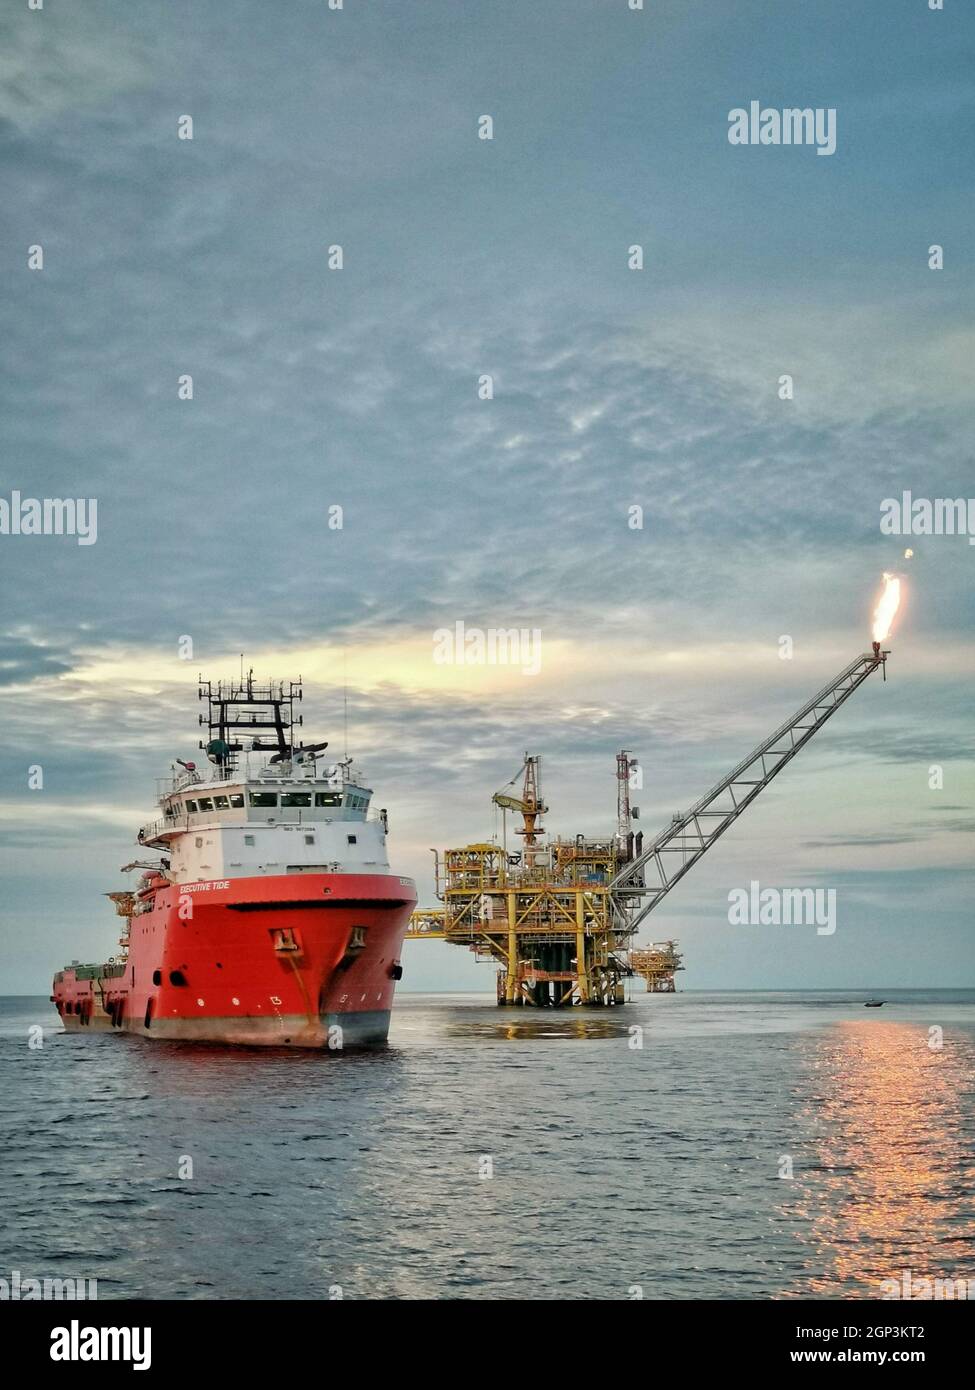 offshore support vessel stand by near oil platform at sea Stock Photo